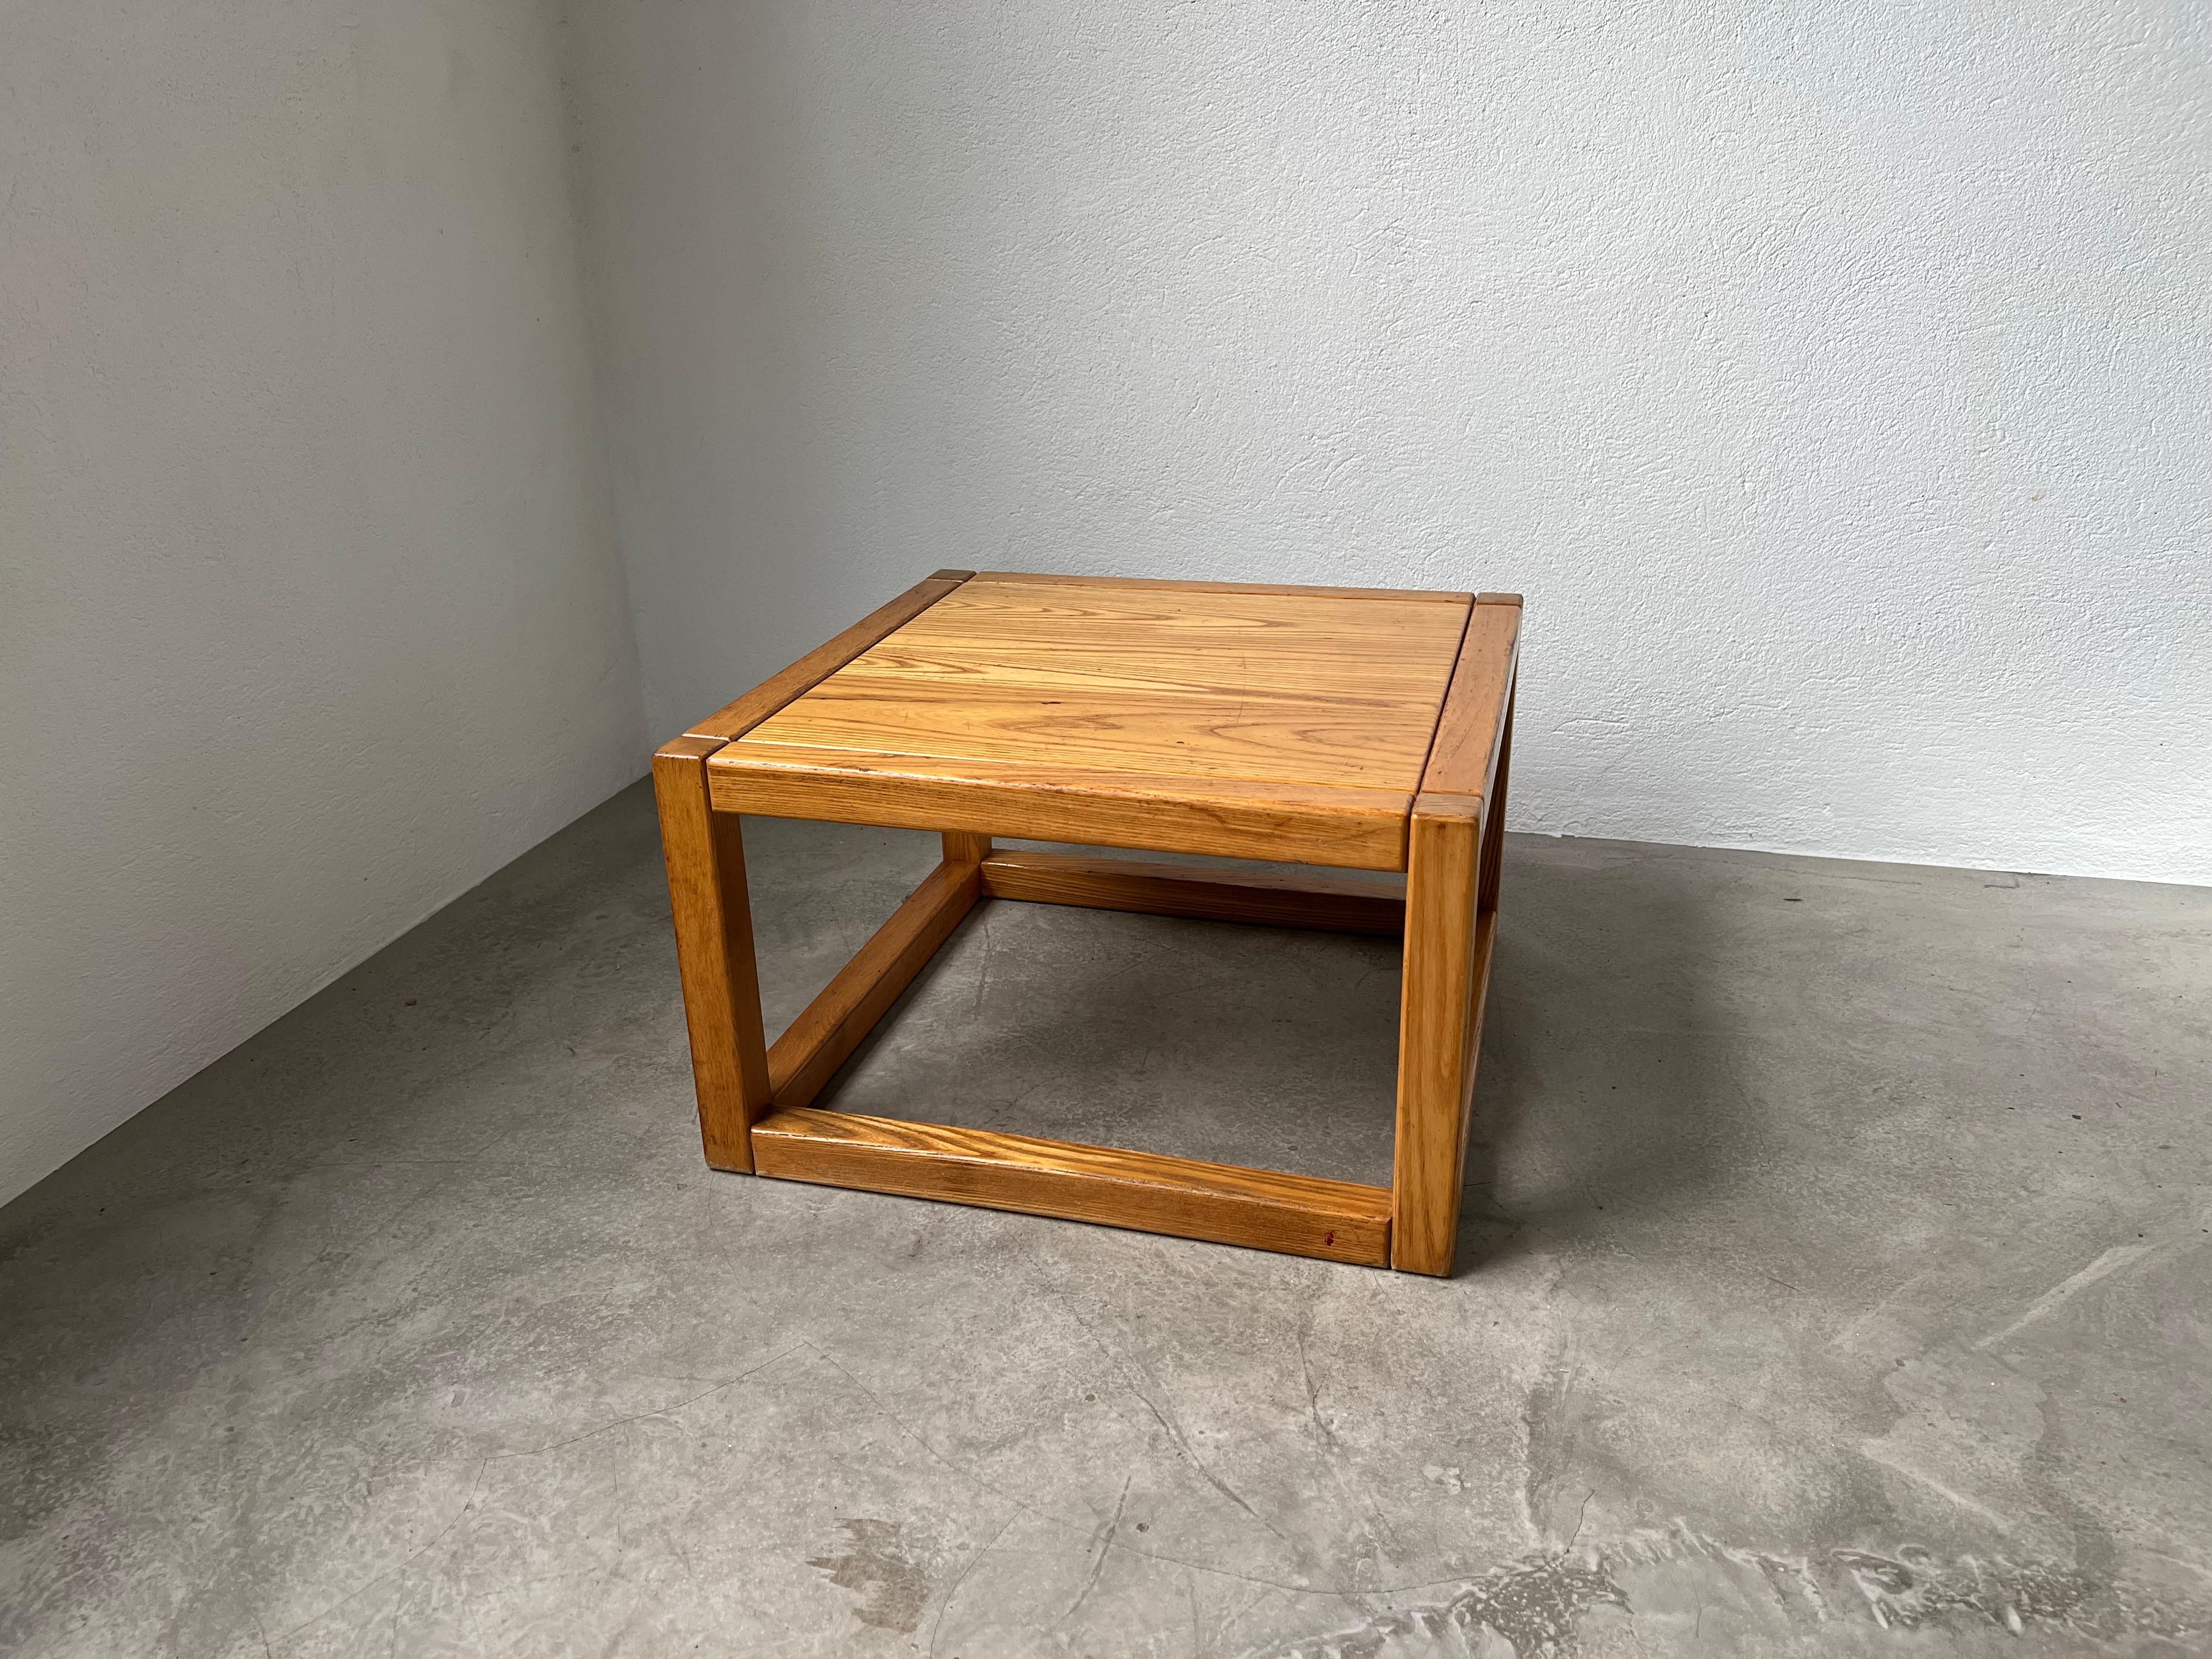 Let yourself be seduced by the charm of this square solid oak coffee table by Maison Regain, from the 70s. Authentic and elegant, this piece embodies the essence of vintage design. The solid oak provides unfailing robustness, while its square design